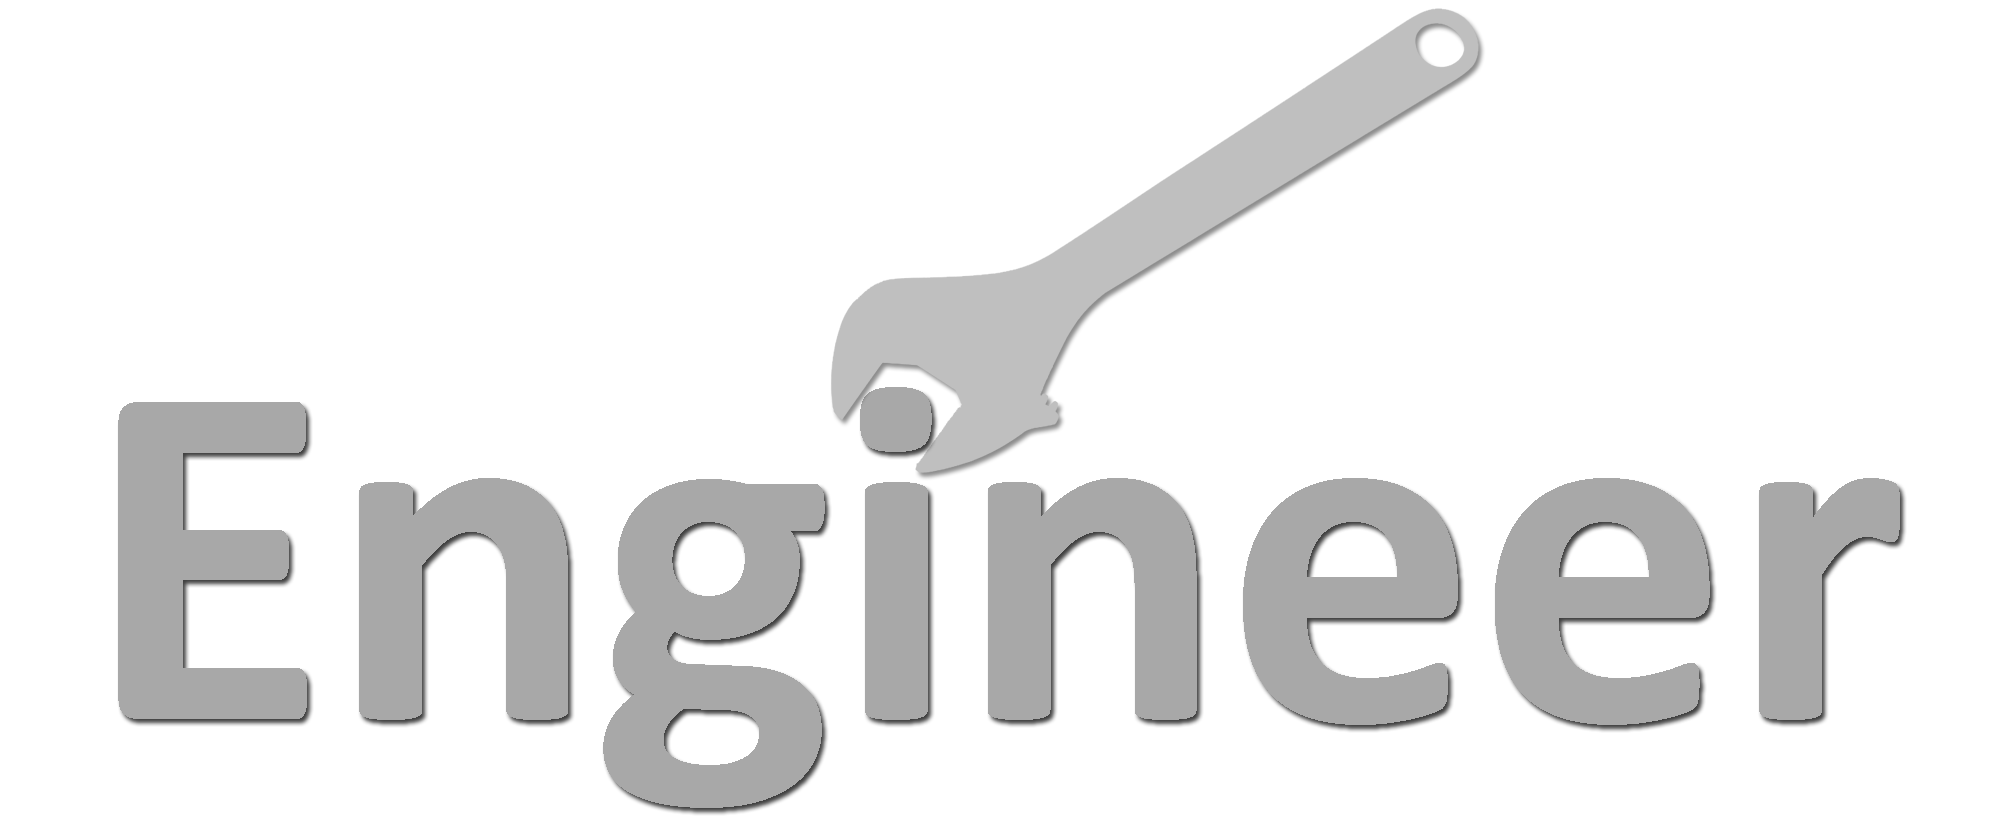 Engineer Wrench